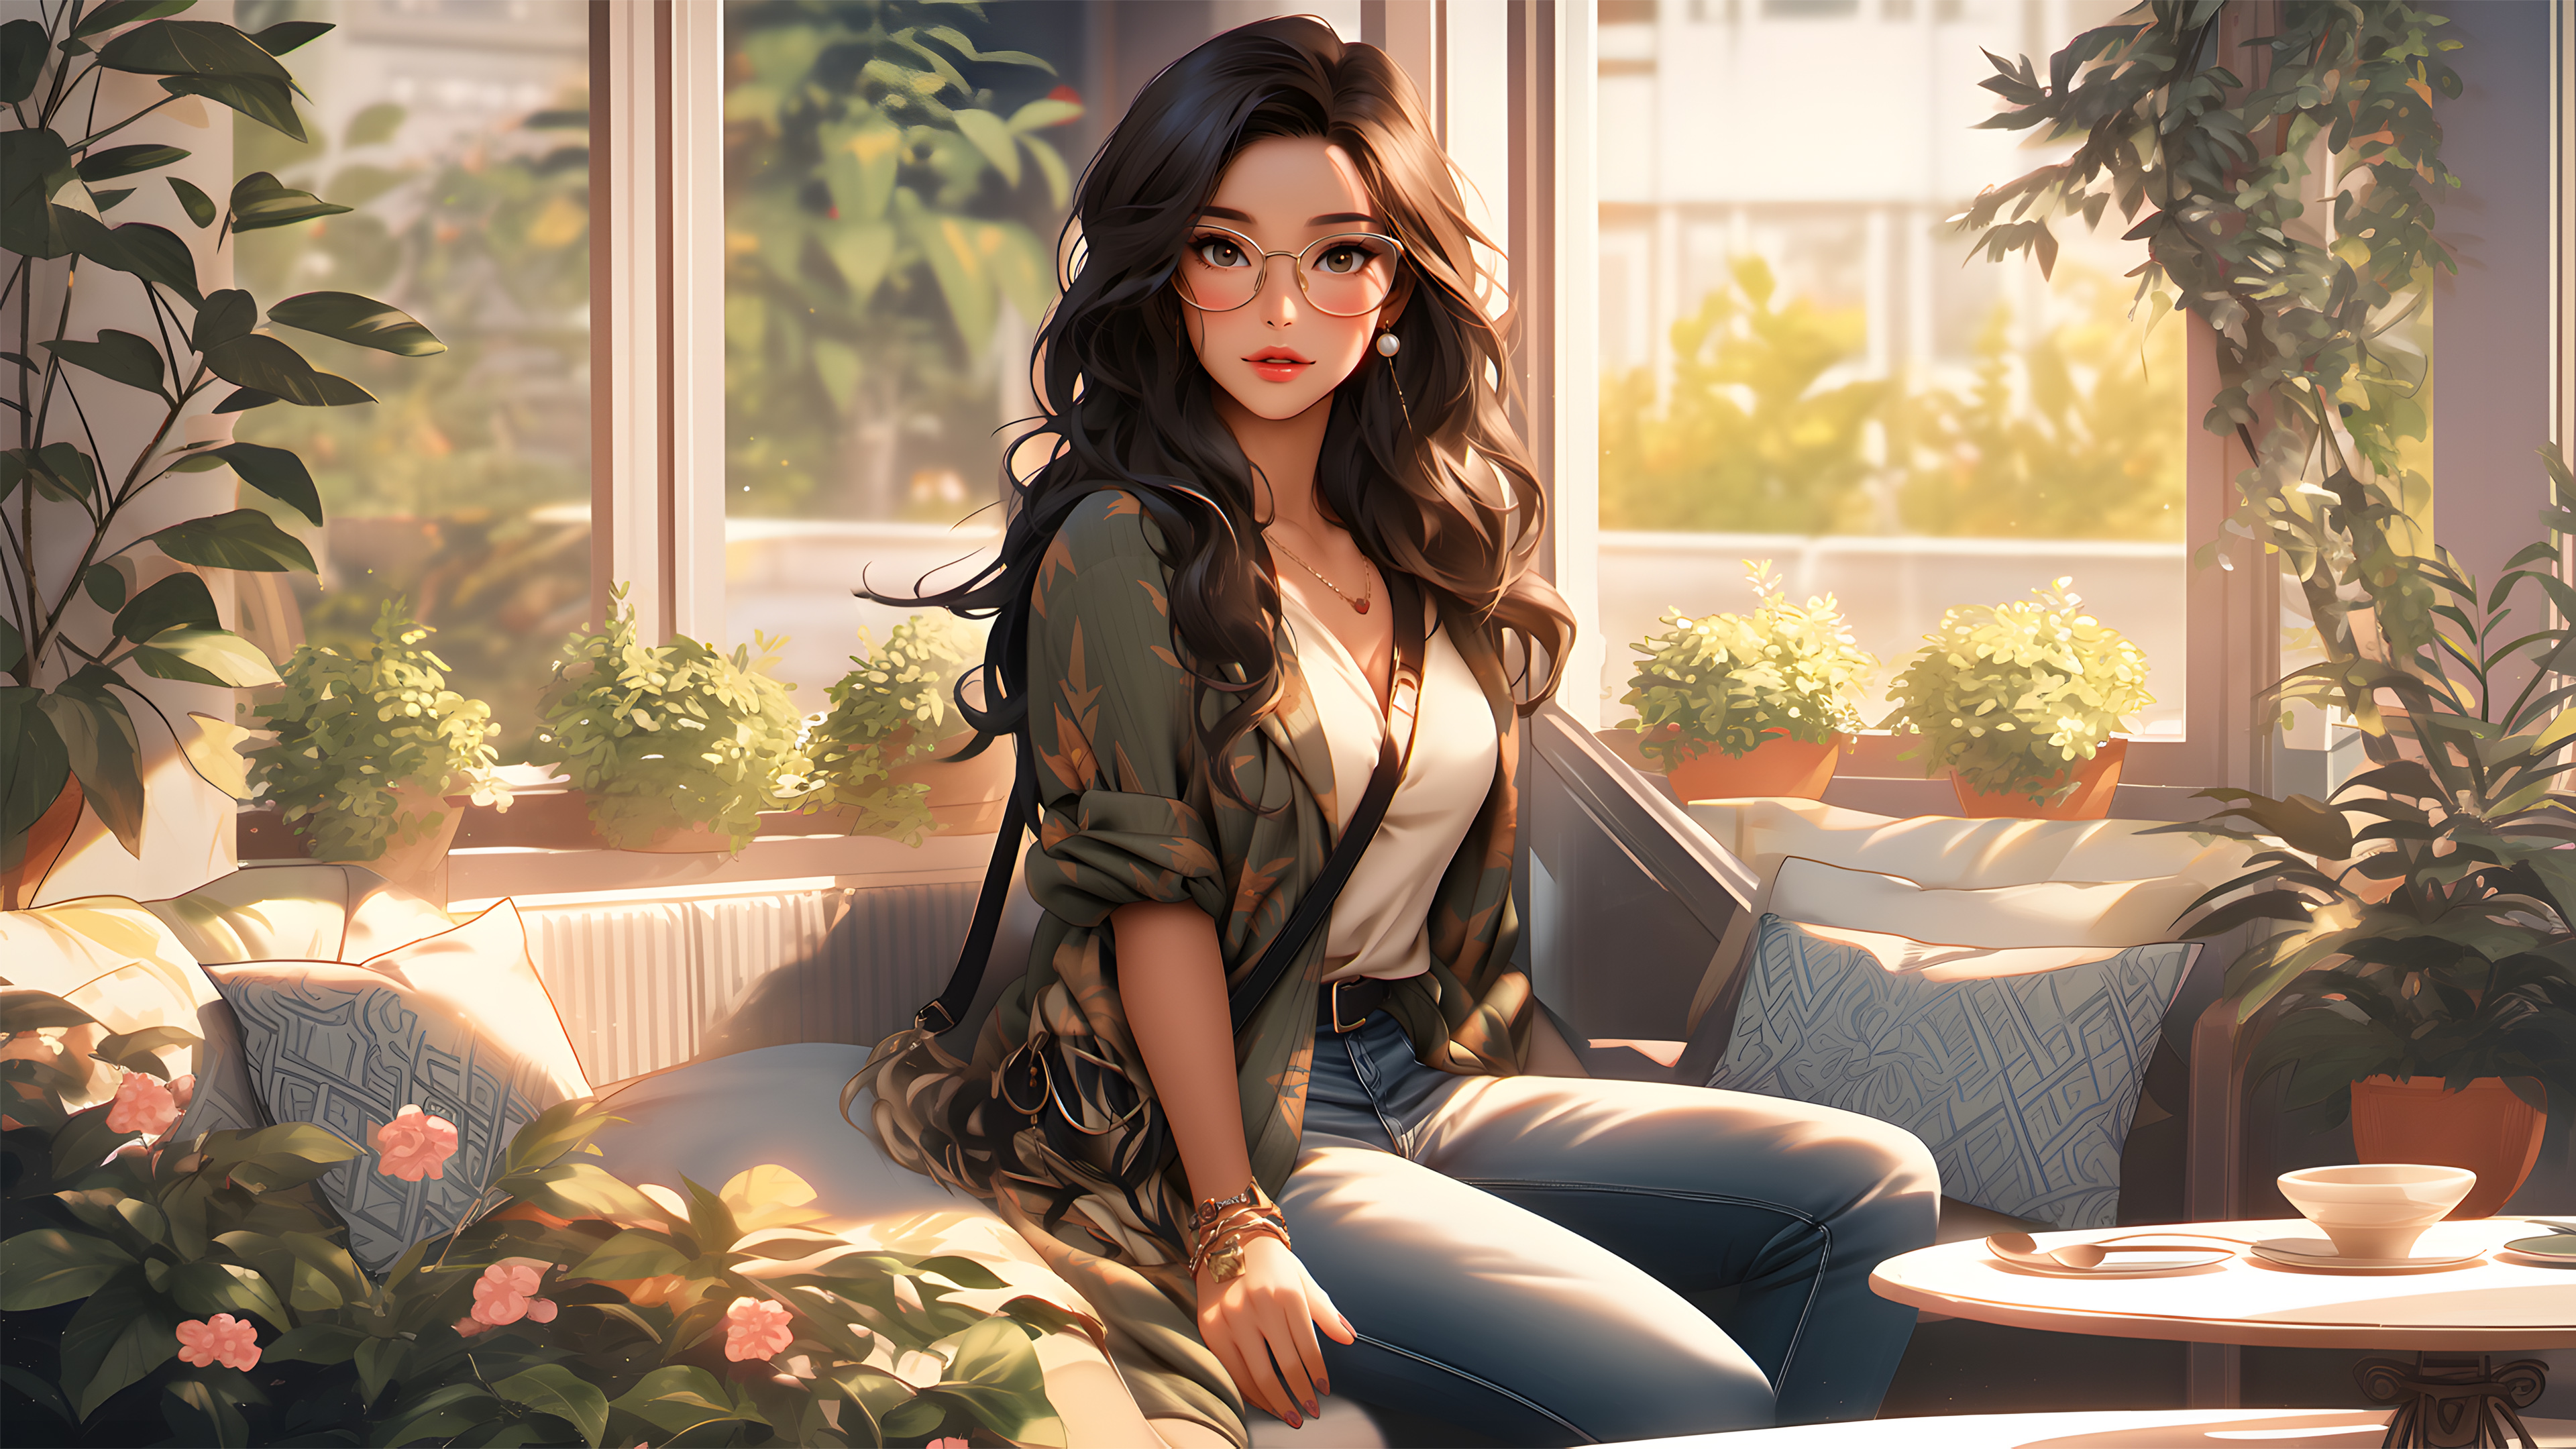 General 3840x2160 AI art women digital art long hair sitting looking at viewer leaves sunlight flowers window earring table couch pillow glasses